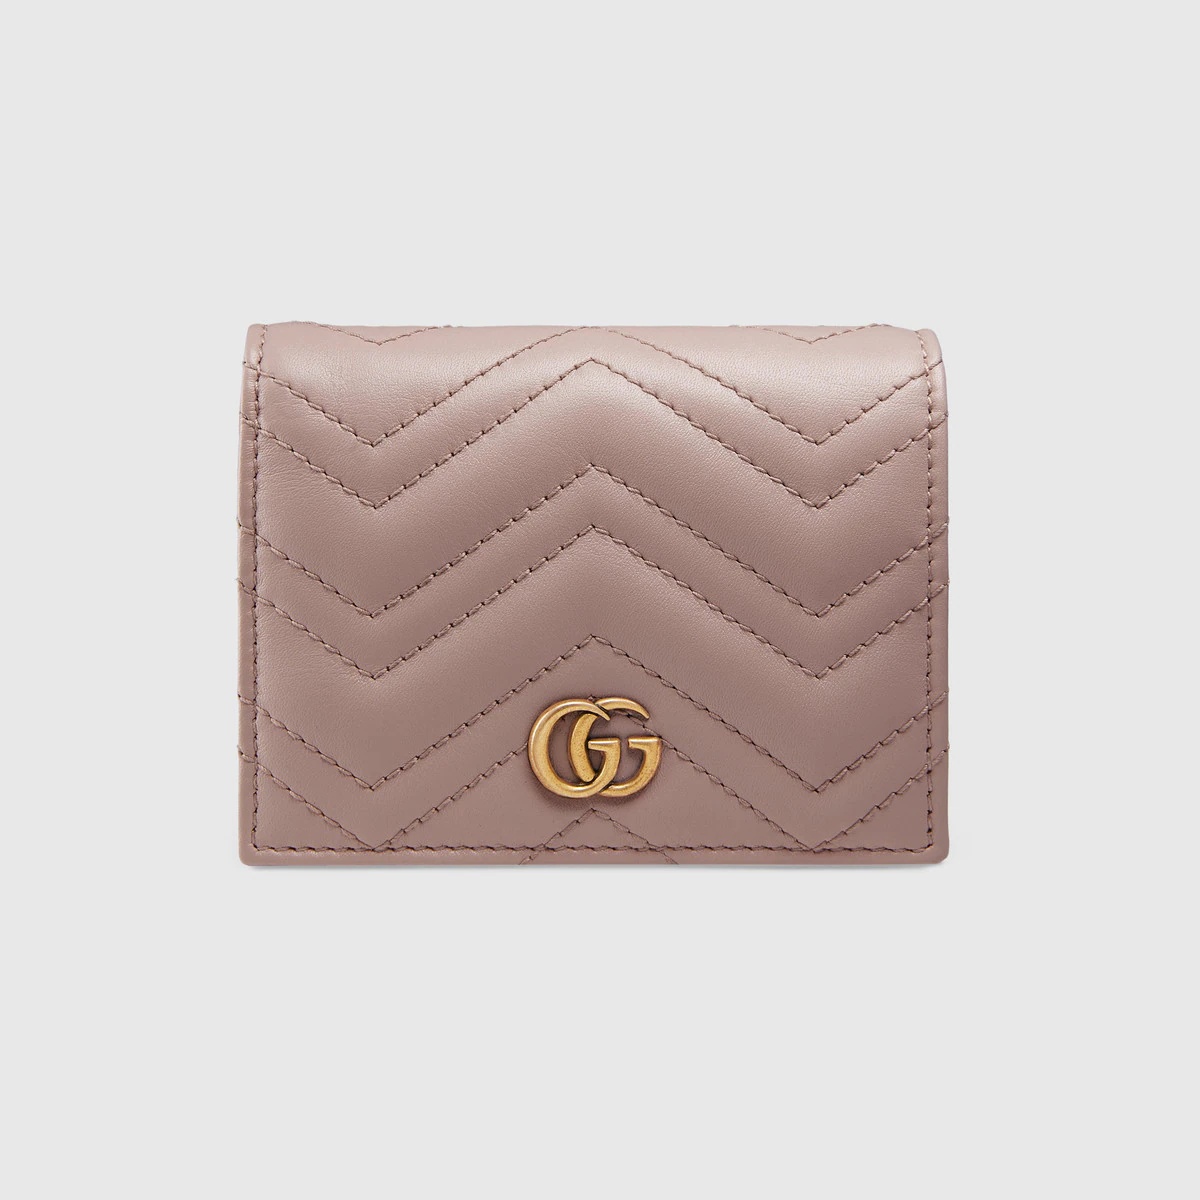 GG Marmont card case wallet - 1